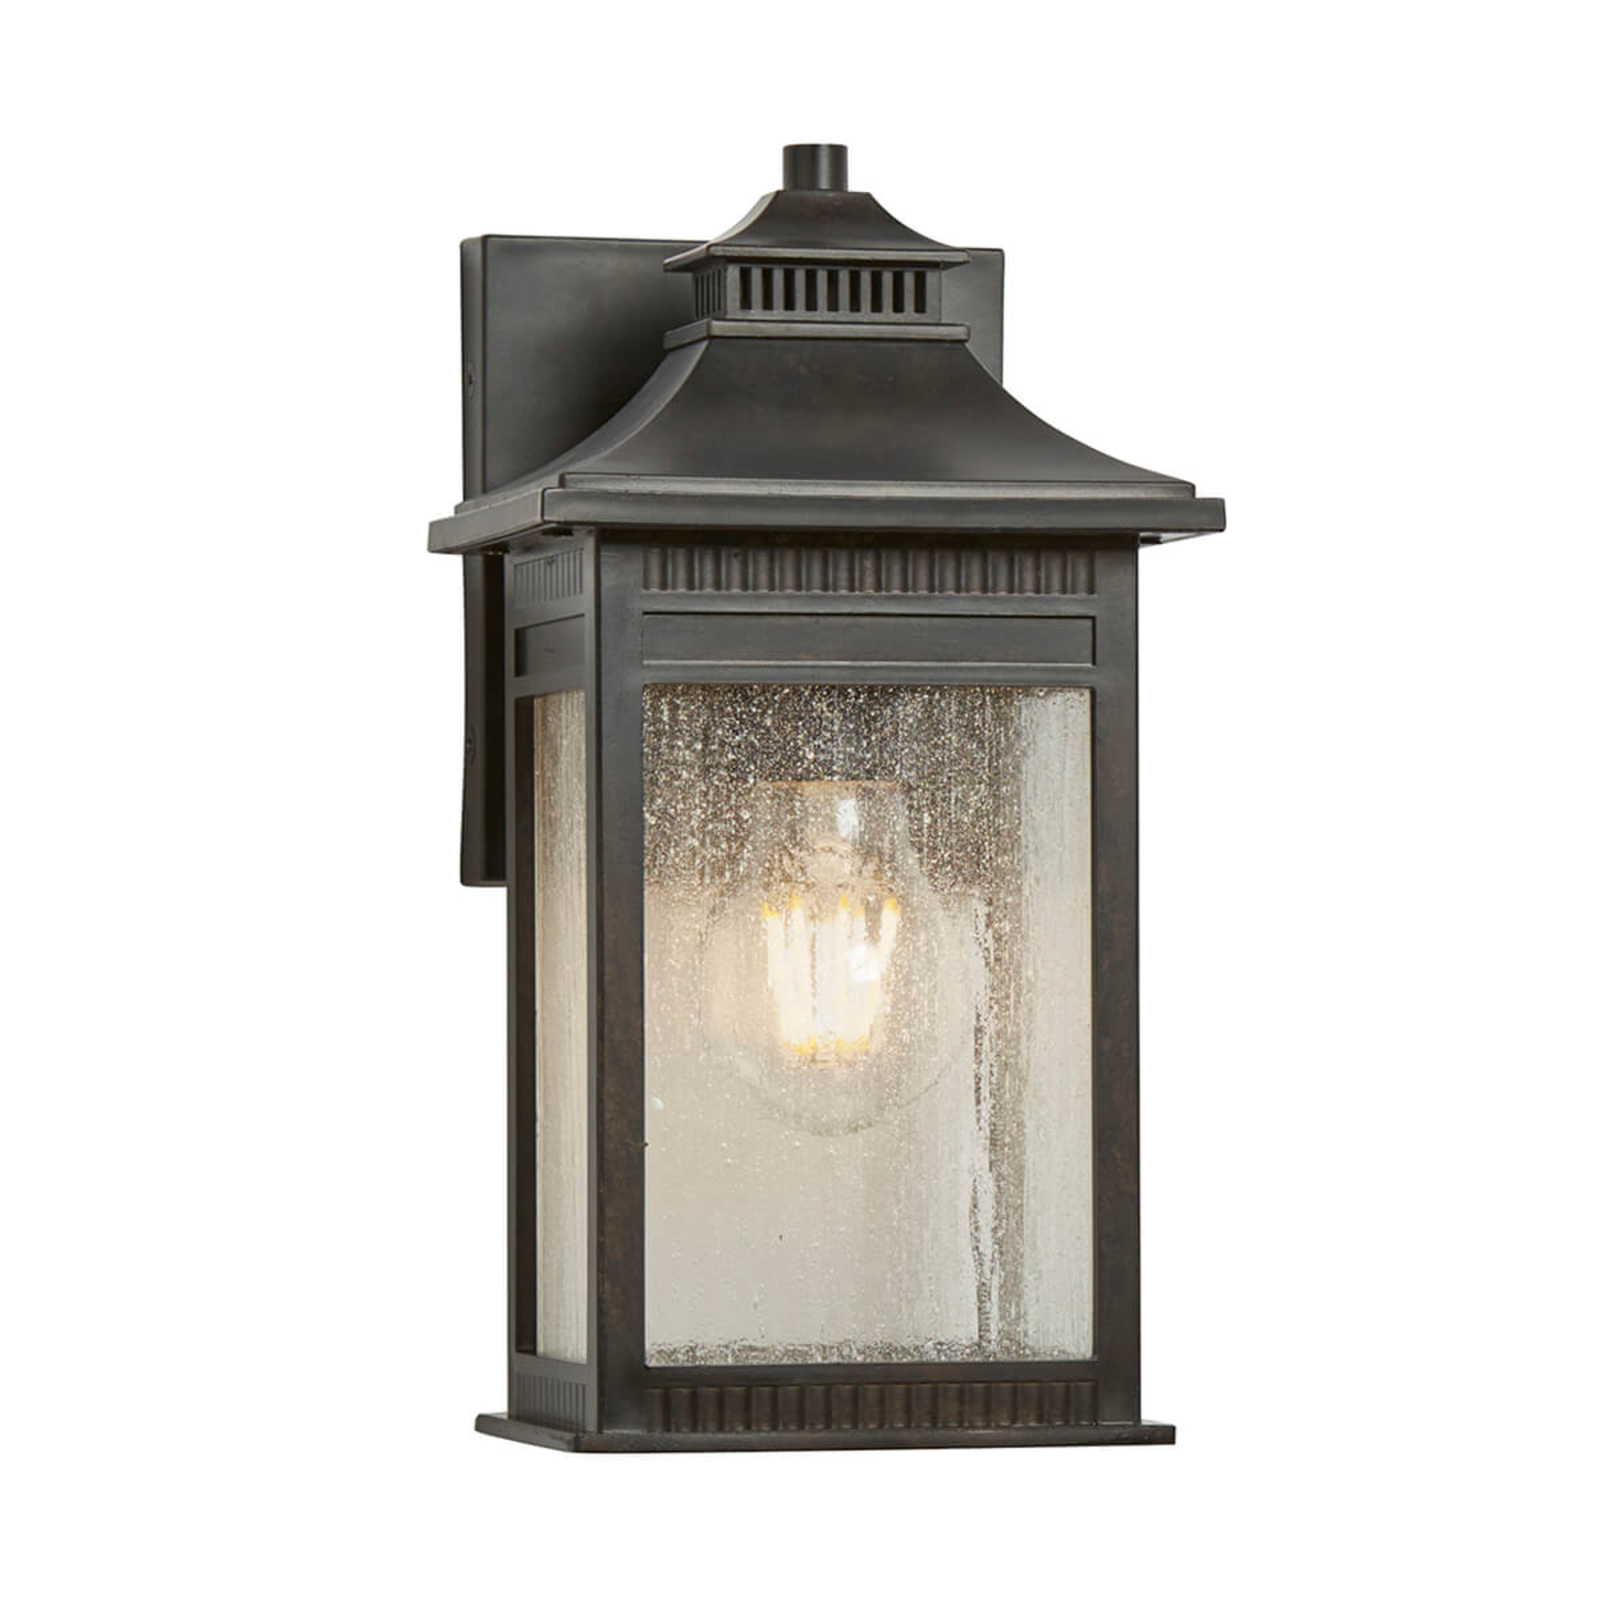 Livingston wall lamp for outdoors - small